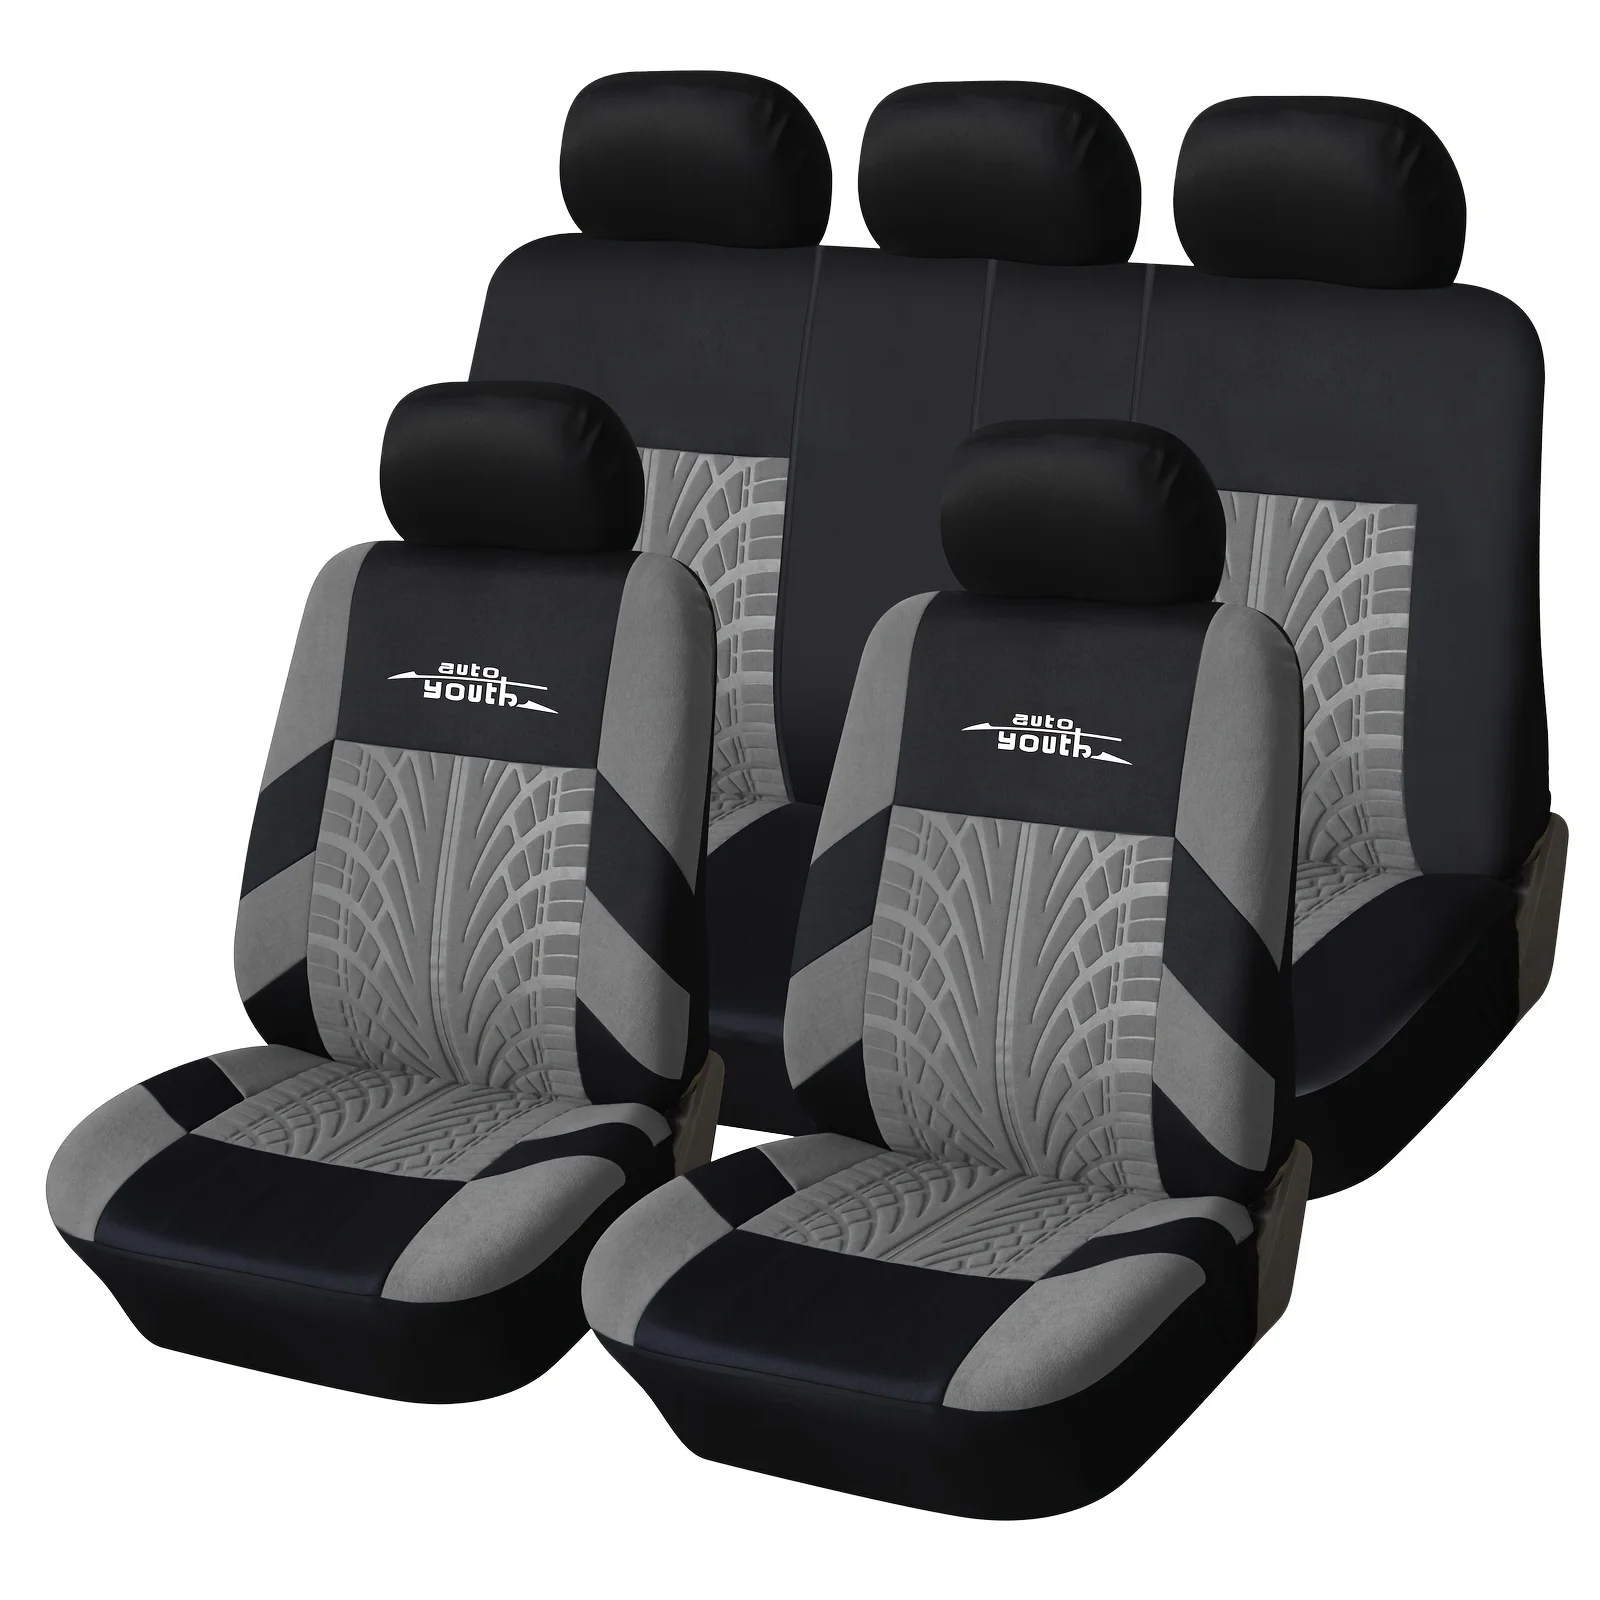 

Car Seat Covers Full Set Front Split Rear Bench For Car Universal Cloth SUV Sedan Van Automotive Interior Covers Compatible